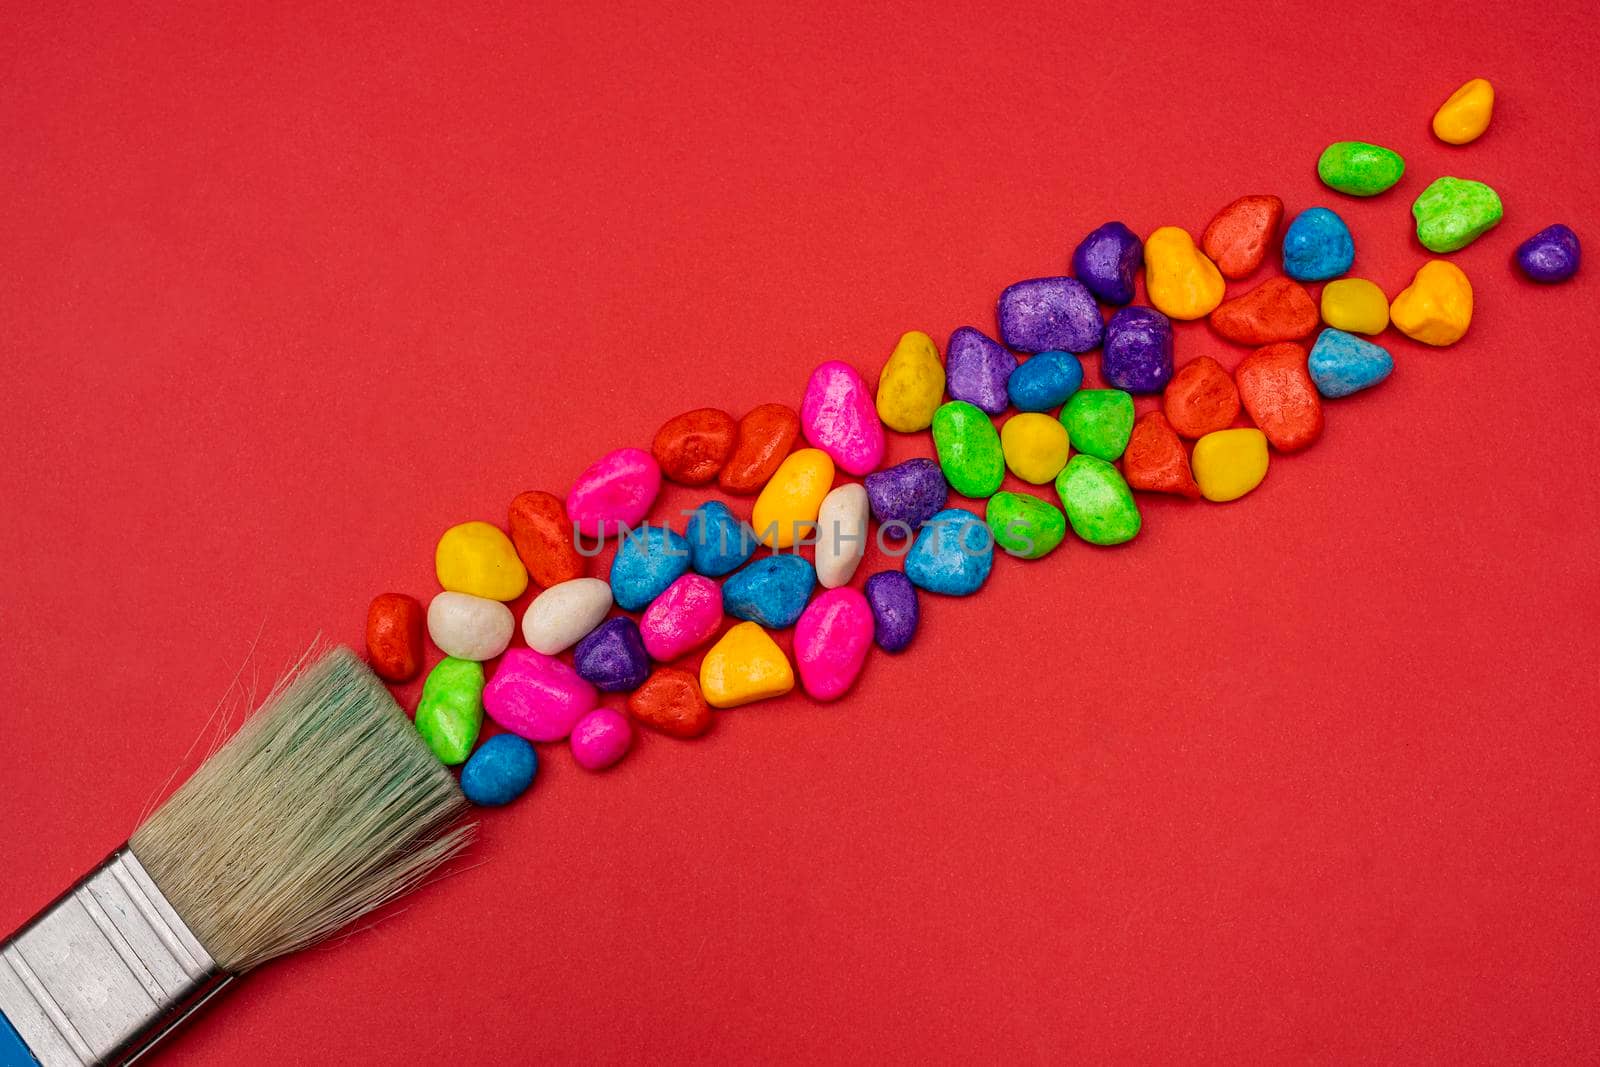 a brush leaves a trail of colored pebbles